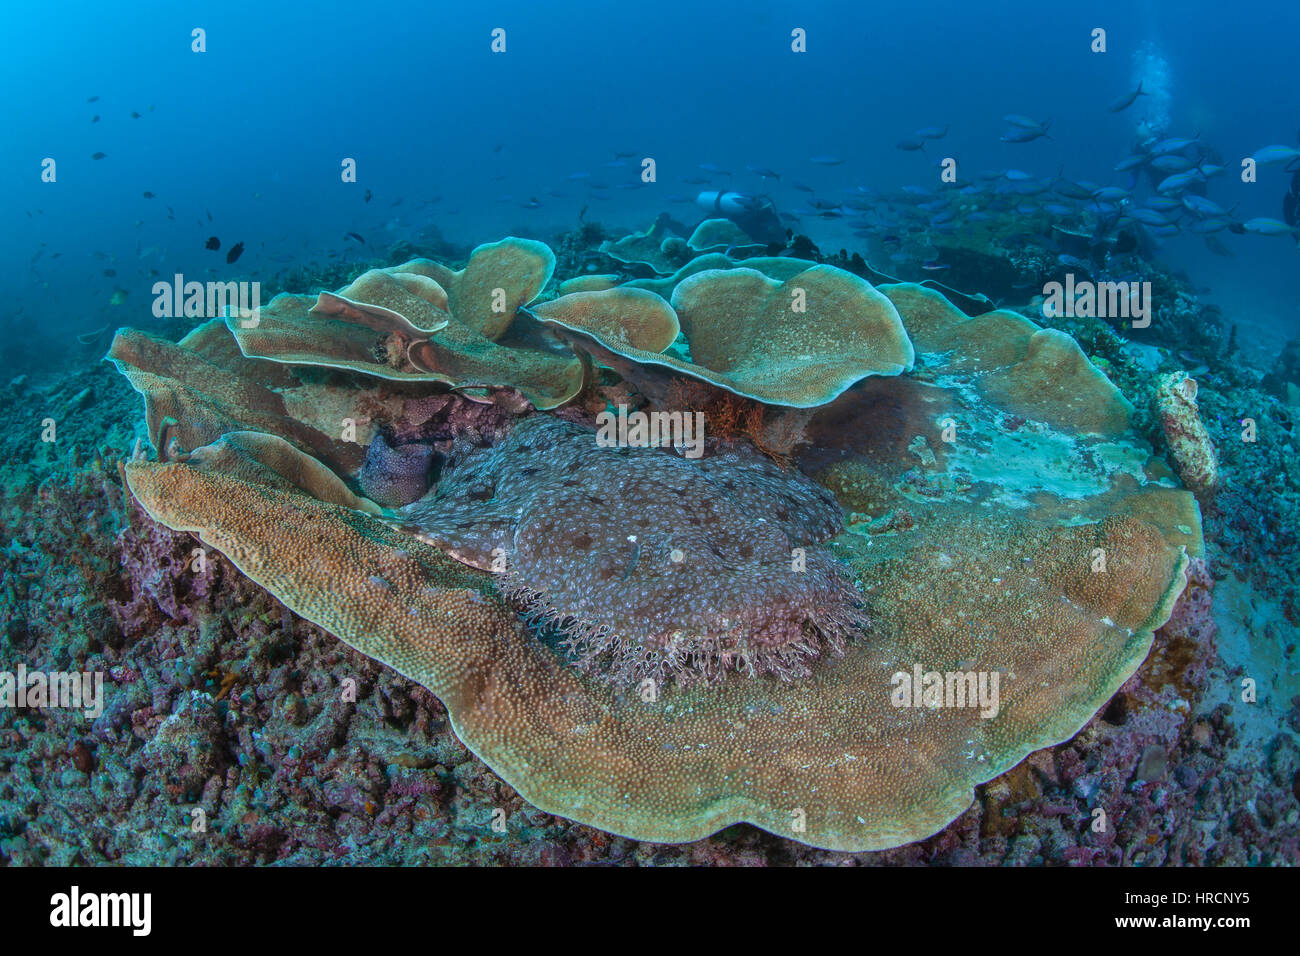 Tasseled wobbegong shark sleeping in a large colony of cabbage coral (Turbinaria) as scuba divers, unaware, swim by in the background. Raja Ampat, Ind Stock Photo